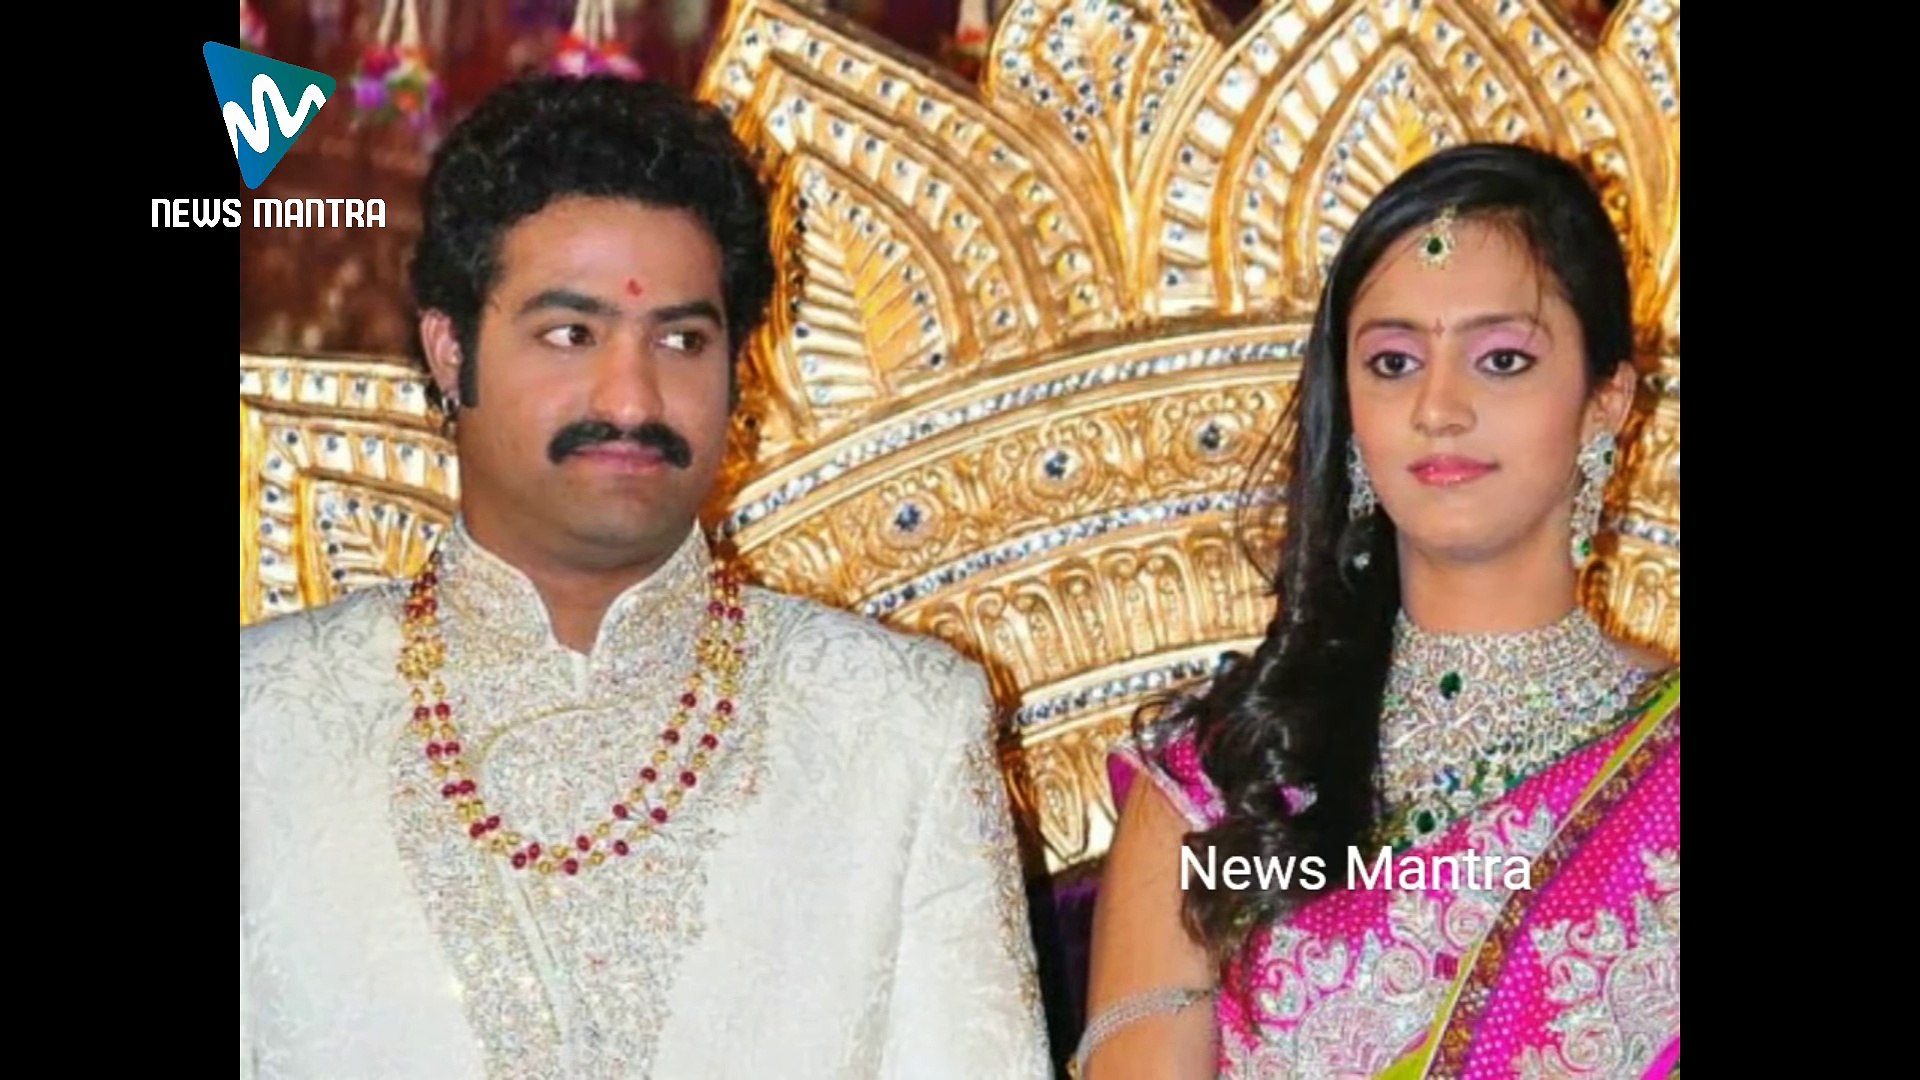 Age Difference Between Jr Ntr And Lakshmi Pranathi News Mantra Youtube Video Dailymotion Age of 18 with junior ntr. age difference between jr ntr and lakshmi pranathi news mantra youtube